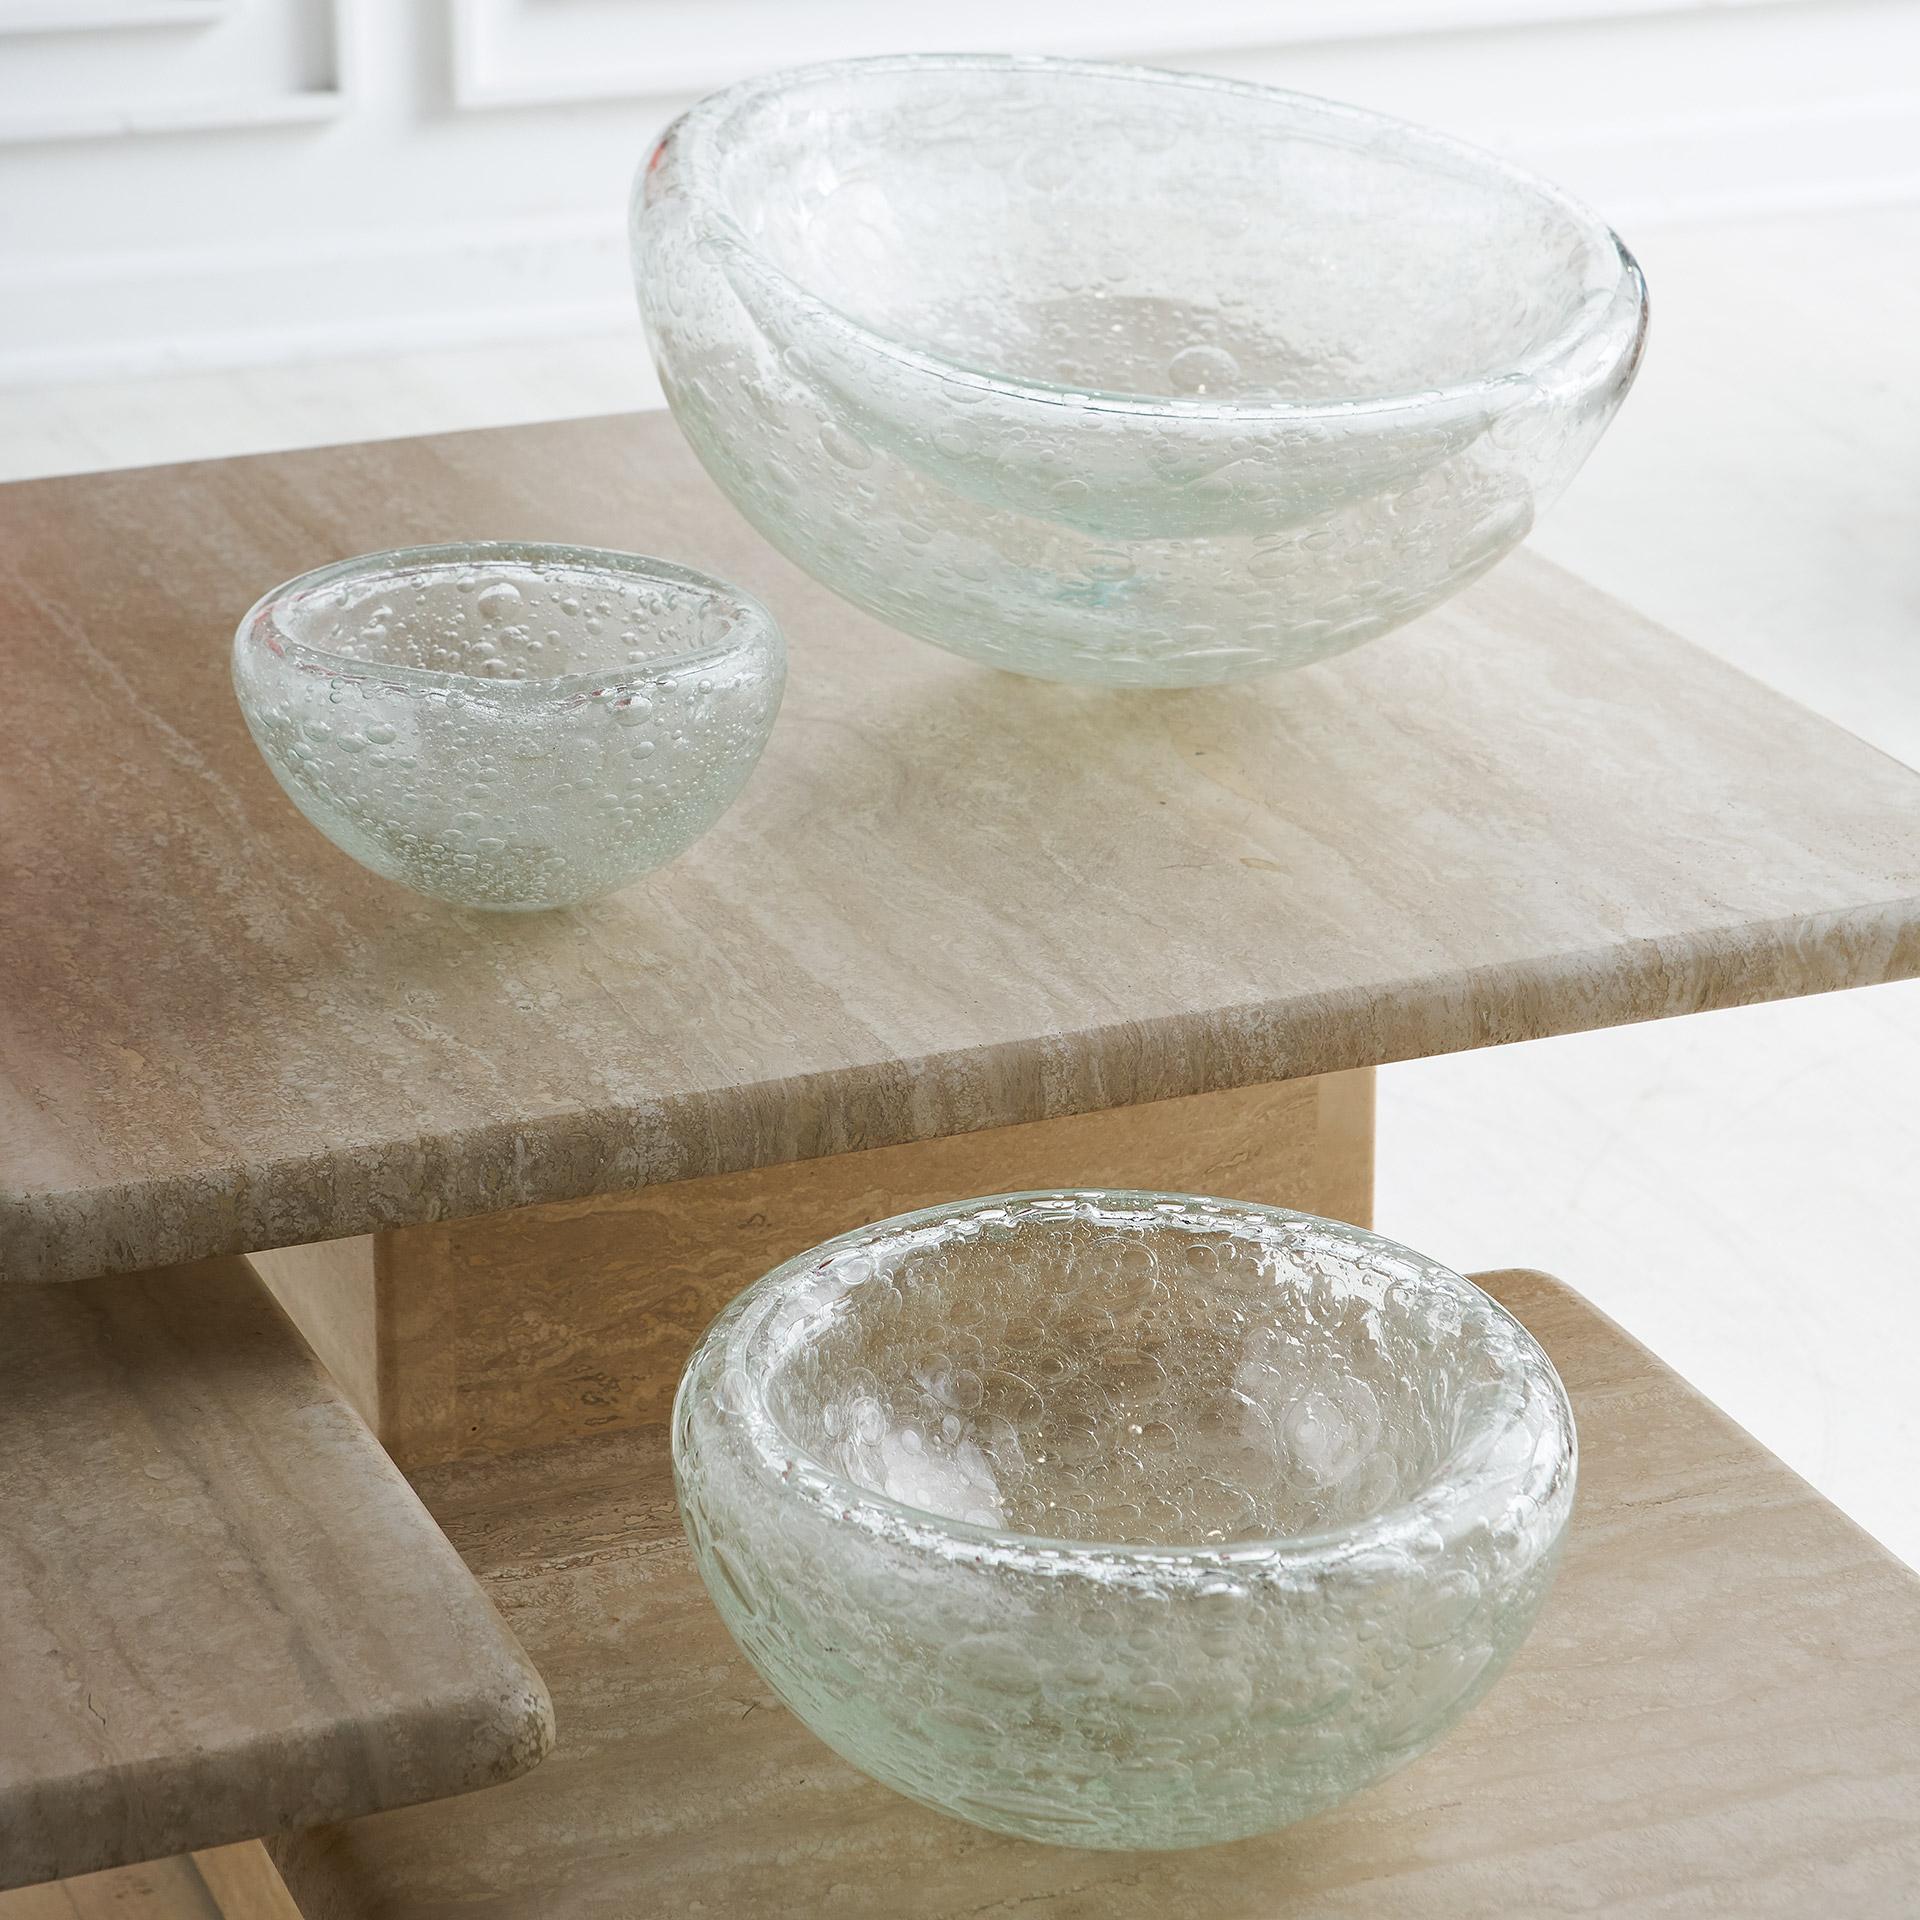 Wonderful hand blown glass bowls with delightful bubble effect. Sure to add a bit of delight to any tabletop. Each bowl is unique in overall shape and thickness.

Medium: Approx 9